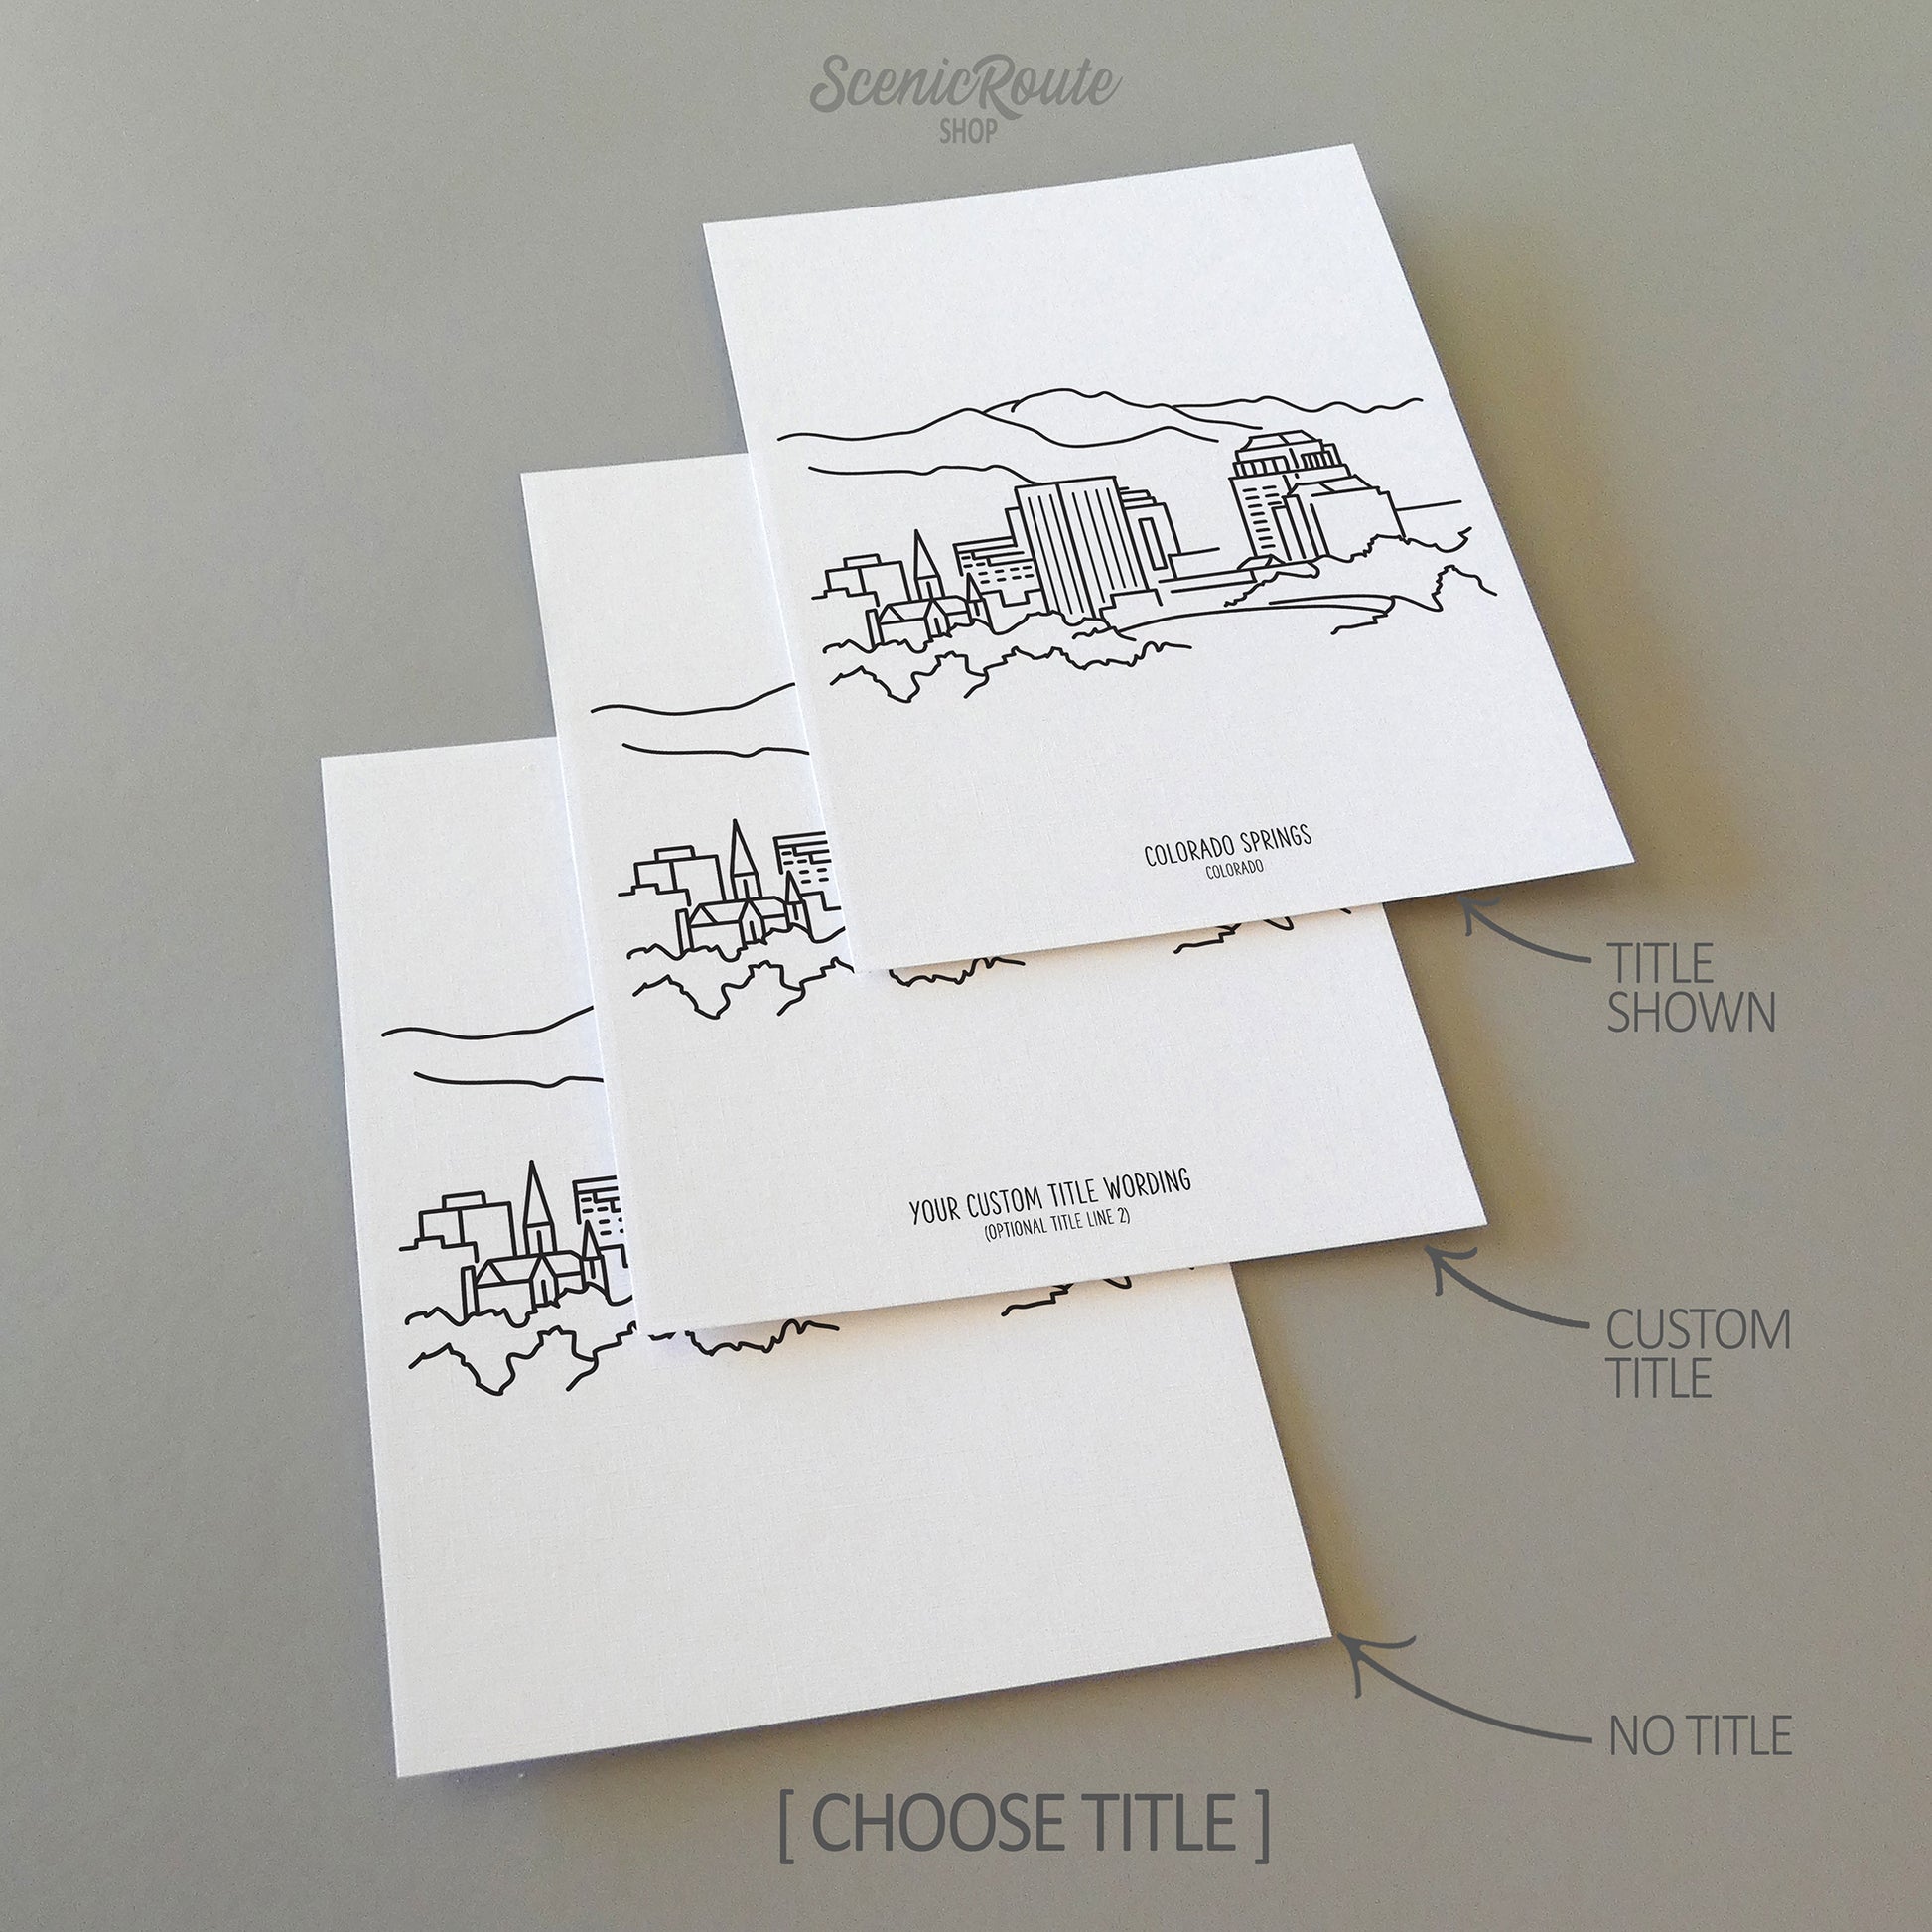 Three line art drawings of the Colorado Springs Colorado Skyline on white linen paper with a gray background. The pieces are shown with title options that can be chosen and personalized.